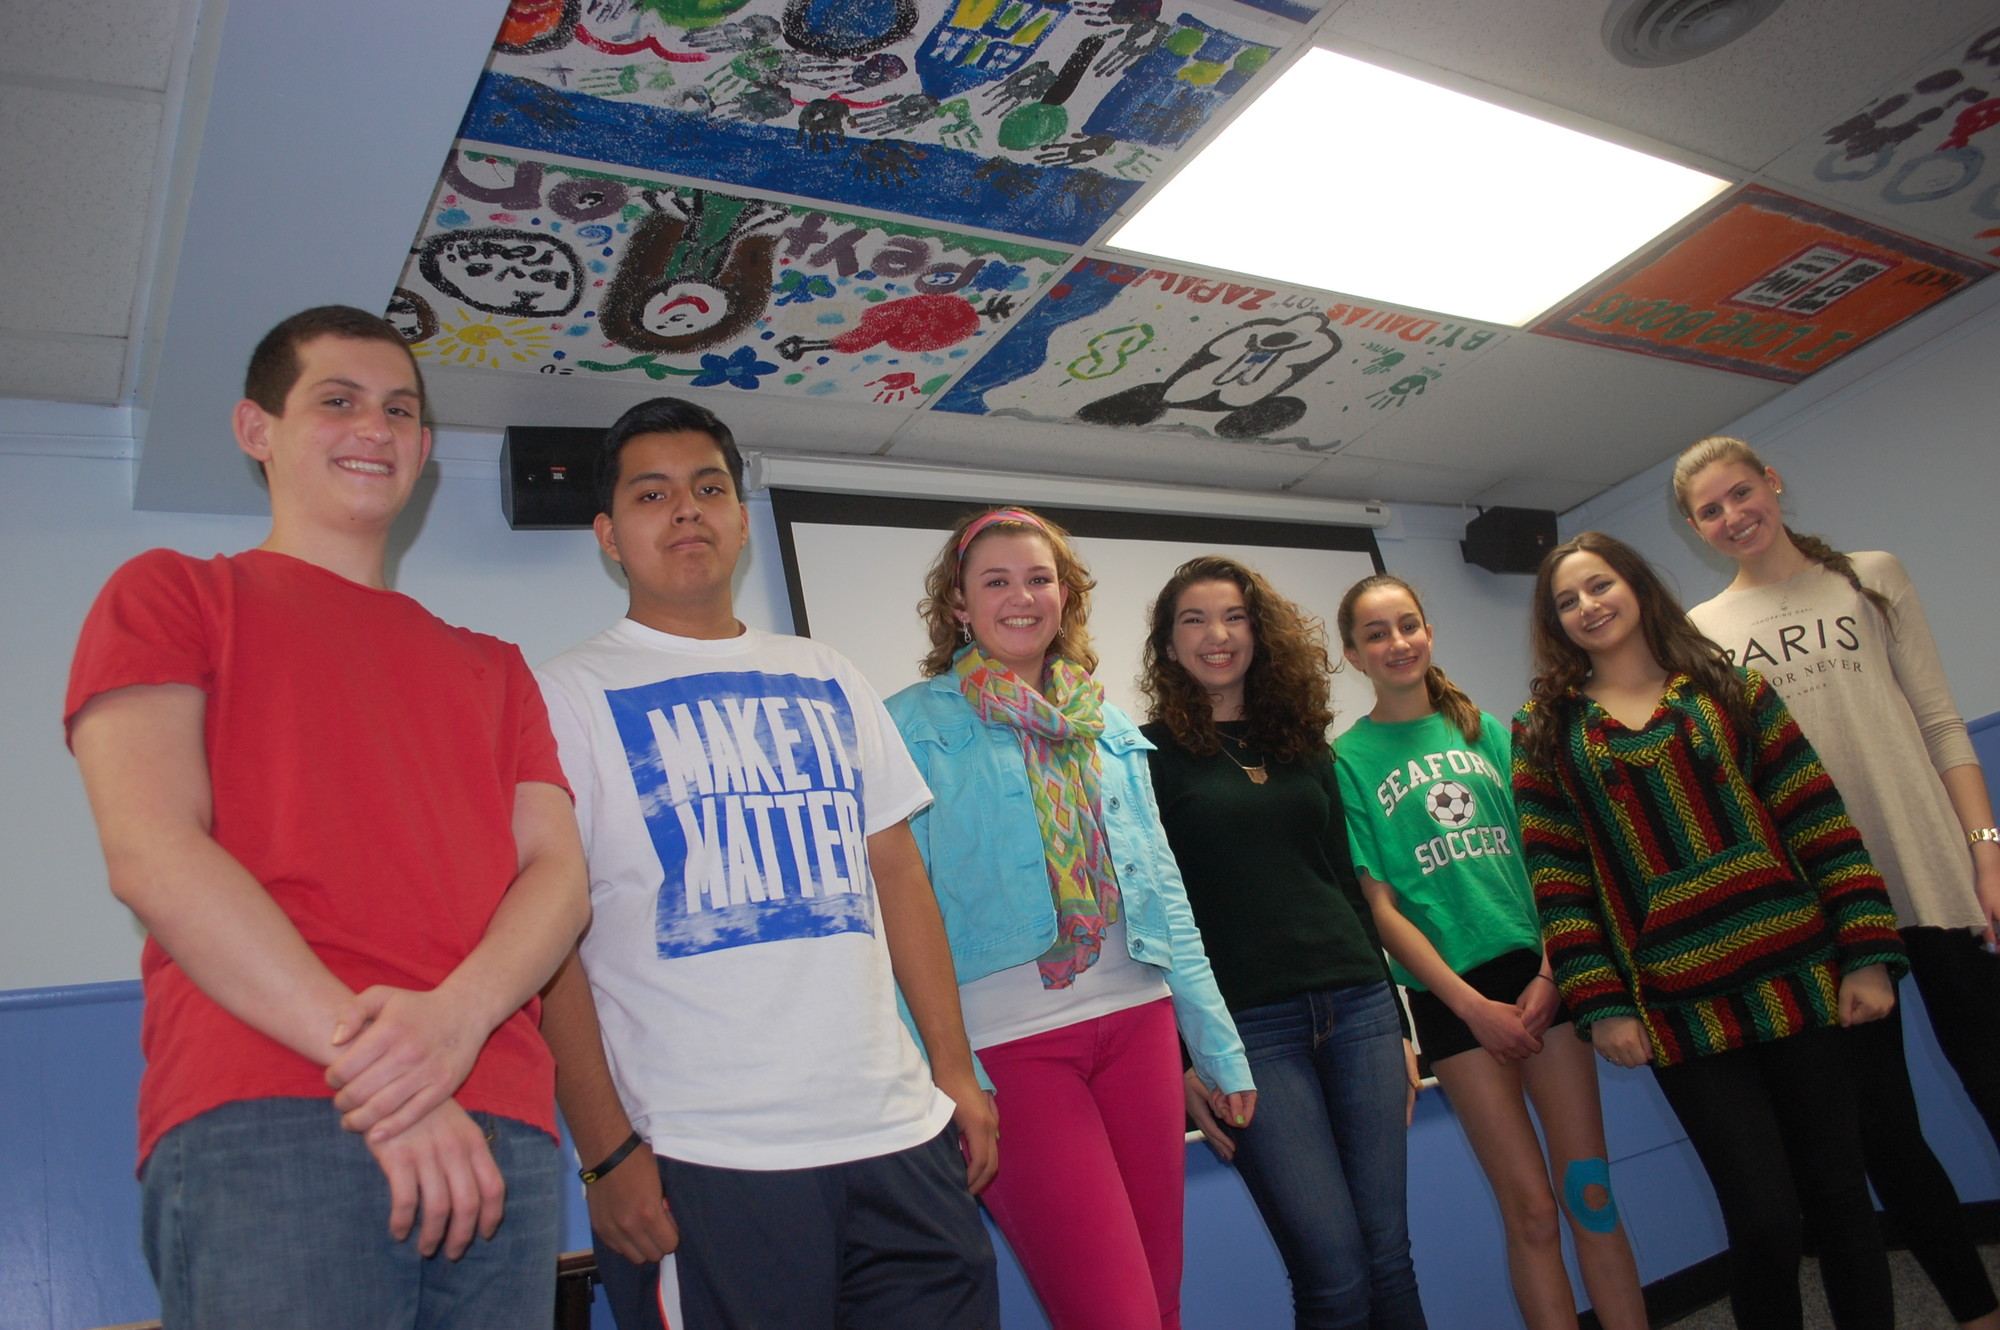 Nearly 100 painted ceiling tiles hang in the Seaford Library’s lower level. Among the artists are, from left, Matthew Zabatta, Mike Emmett, Kenna MacLean, Alison Coggins, Kaitlyn Sidoti, Nicole Merendino and Vicky Zaharopoulos.